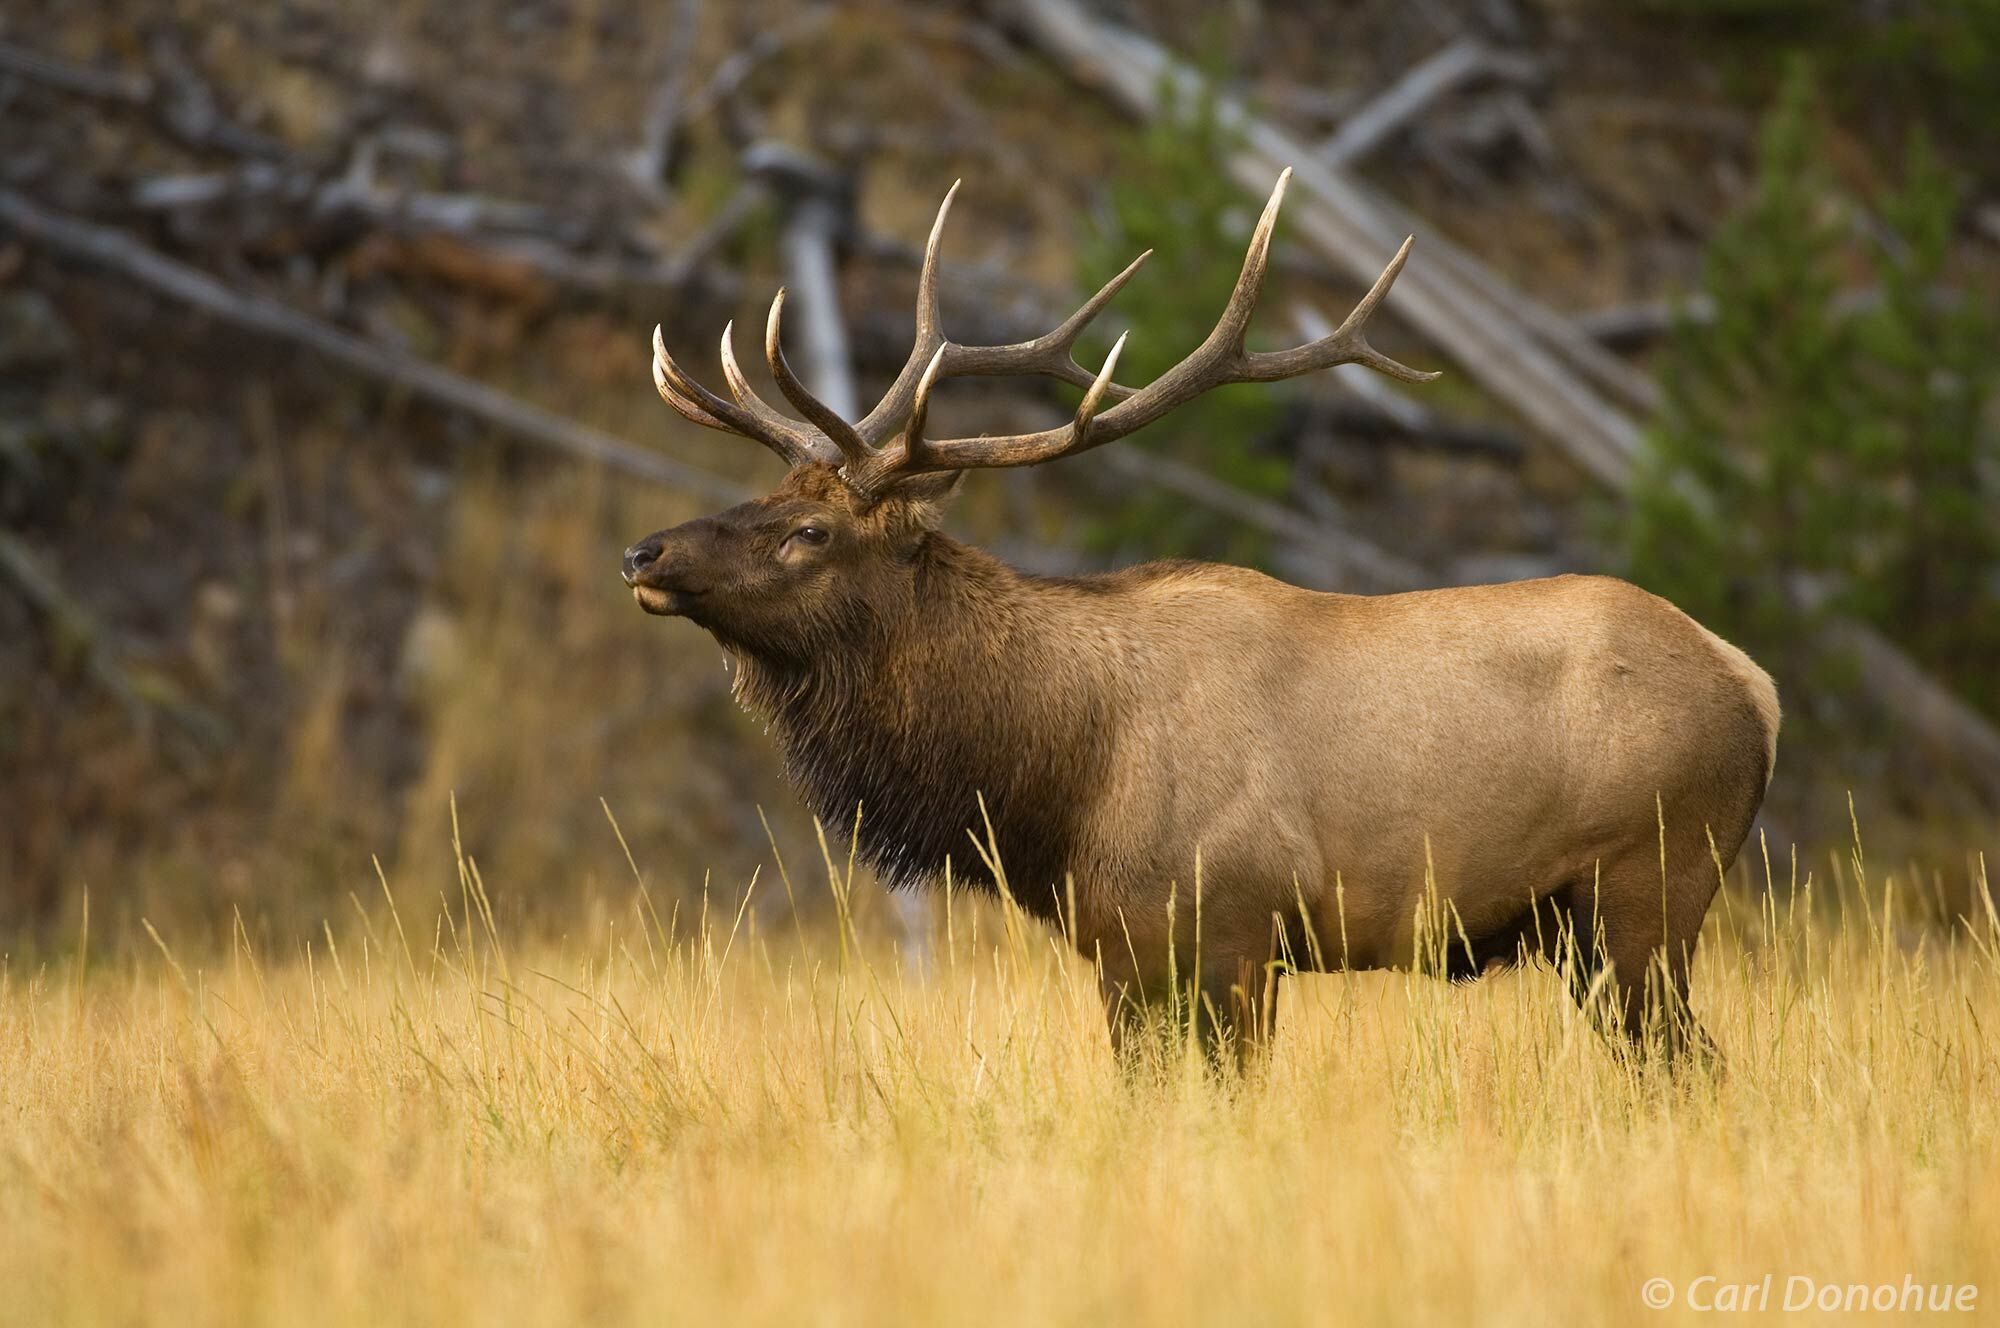 Bull elk bugling in the early morning hours, Yellowstone National Park, Wyoming.